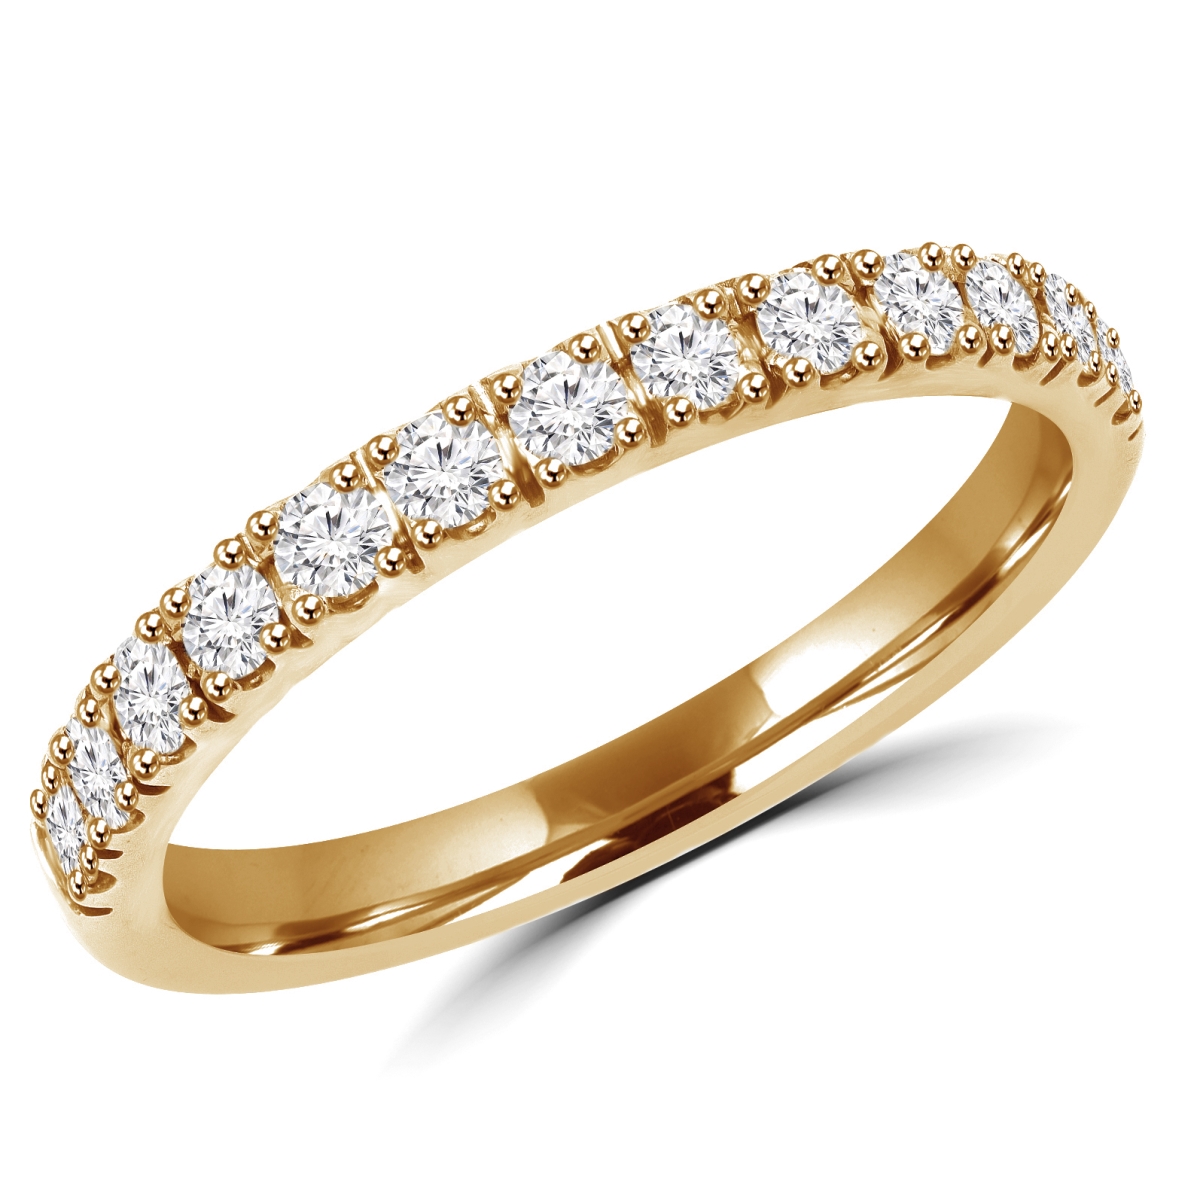 Picture of Majesty Diamonds MD180187-6 0.3 CTW Round Diamond Semi-Eternity Wedding Band Ring in 14K Yellow Gold - Size 6